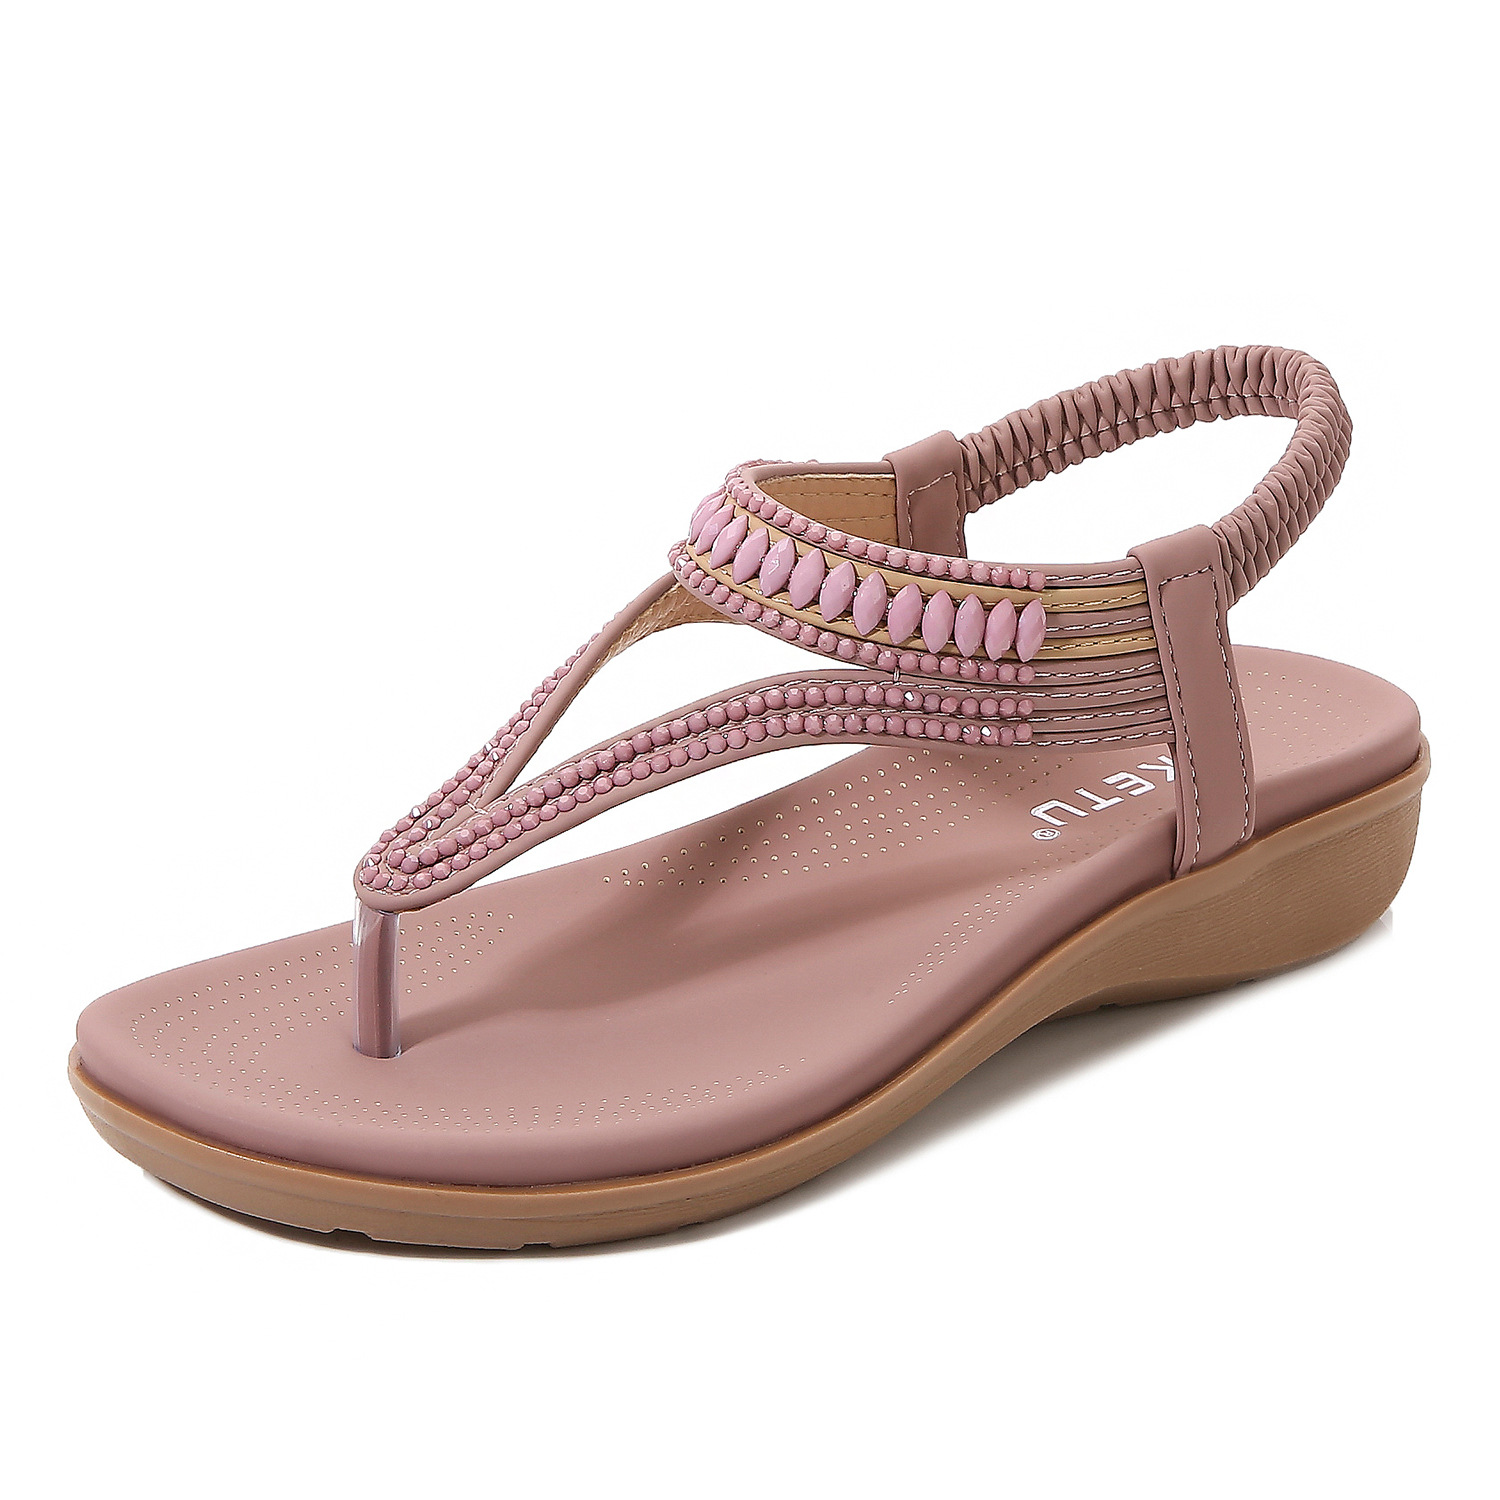 Women's Comfy Arch Support Flat Sandals